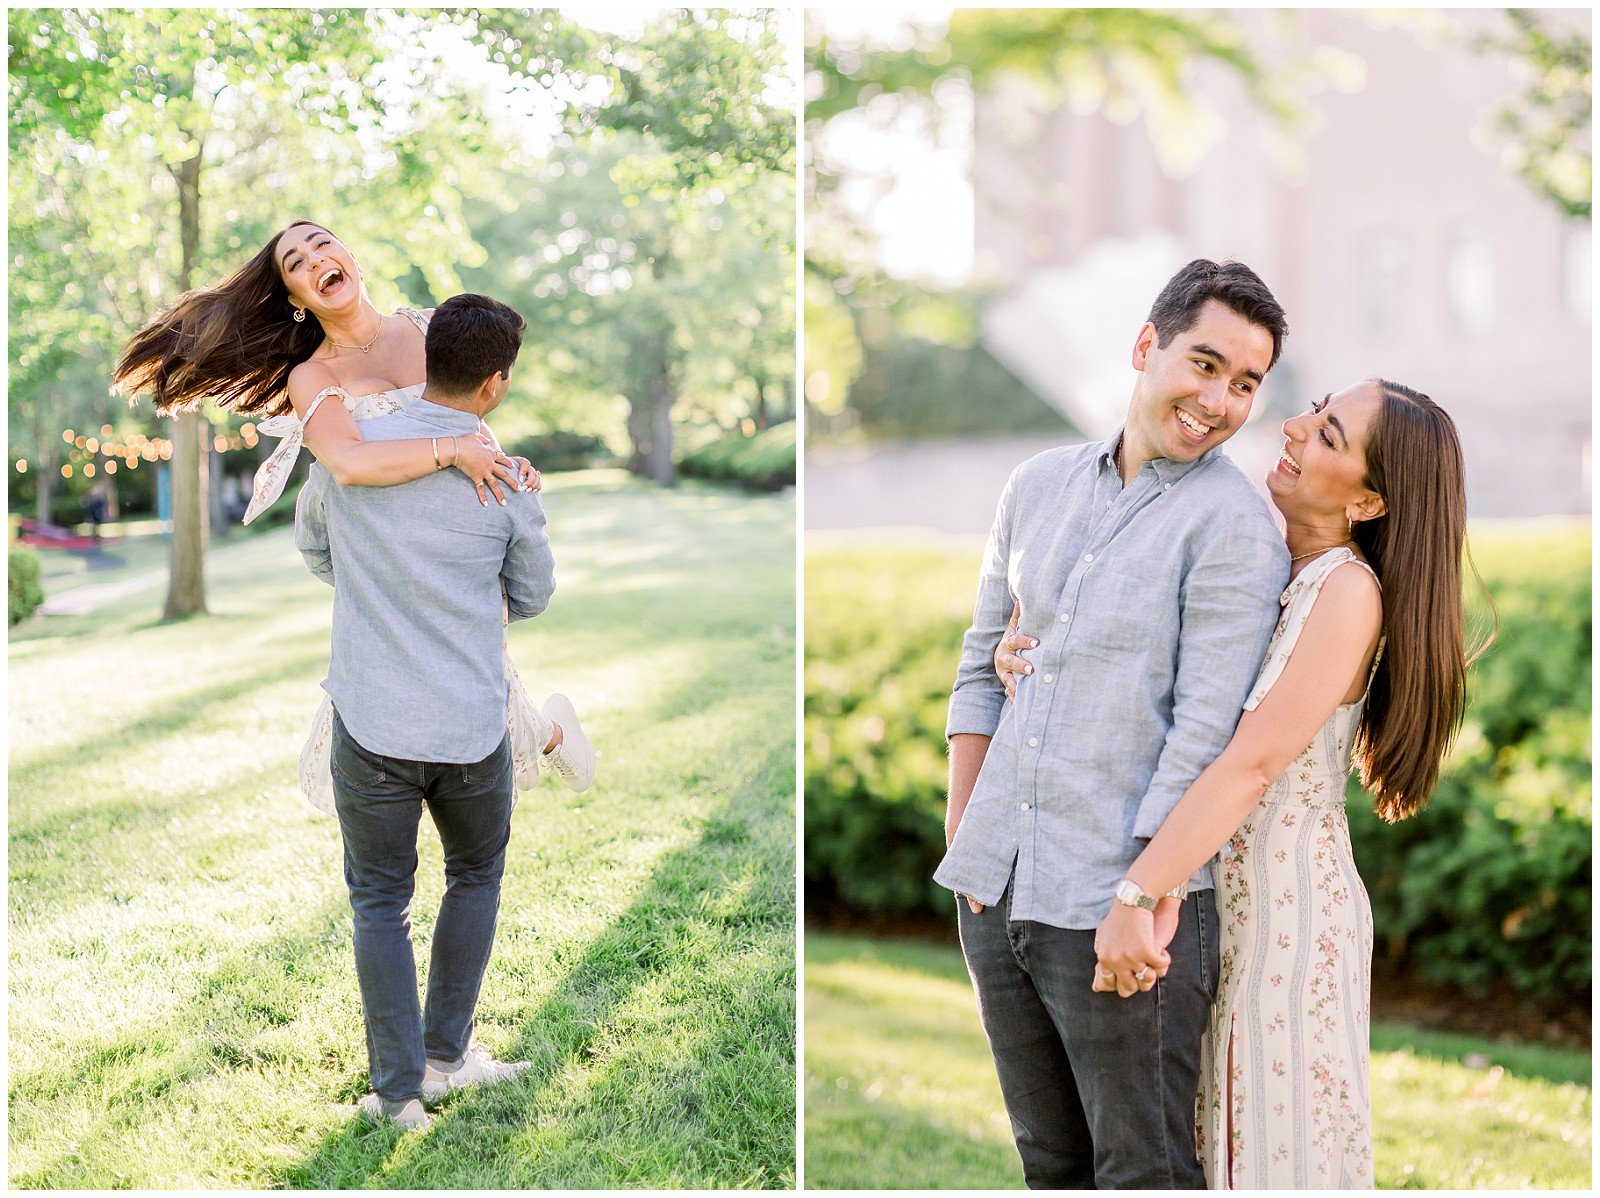 Summer-Engagement-Photos-at-The-Nelson-Atkins-K+S-0522-Elizabeth-Ladean-Photography-photo-_6490.jpg